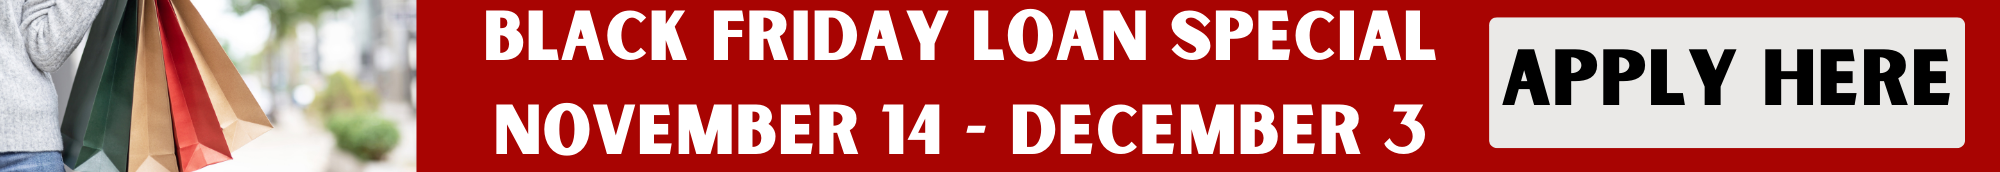 Get $250 CASH when you pre-approve an auto loan with us